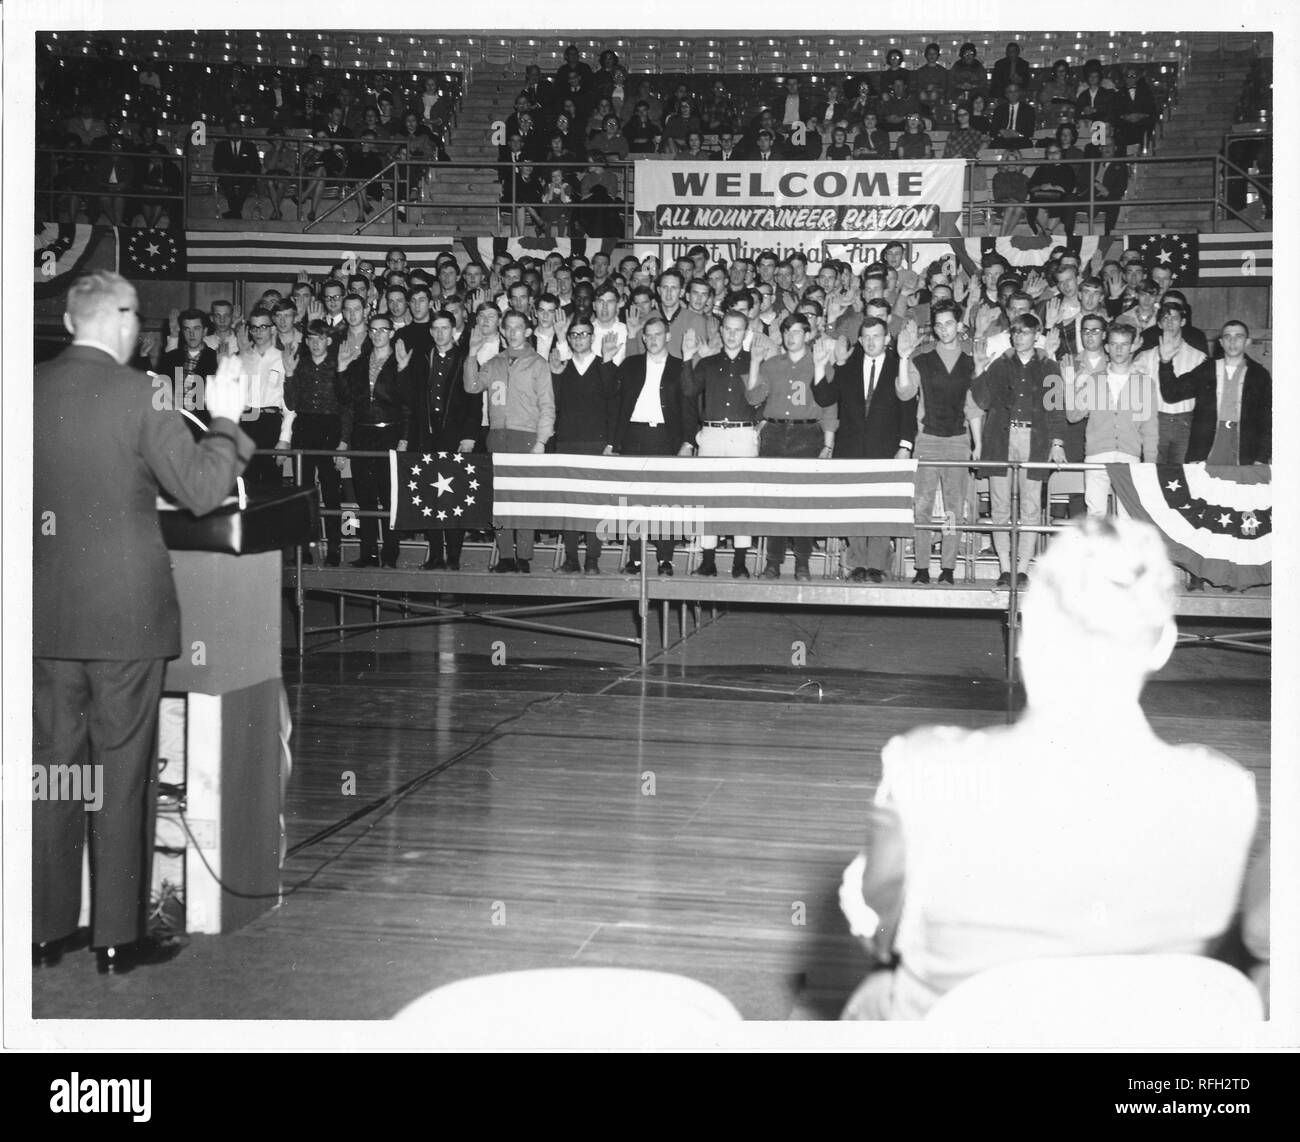 Black and white photograph of a group of young men, likely US military recruits, wearing civilian clothing, standing together on bleachers or stands in an auditorium, and raising their right hands to pledge, with older men and women seated in the upper risers, a large sign in the background with the text 'Welcome, All Mountaineer Platoon, West Virginia's Finest, ' with the back of a seated man visible in the right foreground, and a uniformed man, leading the pledge from a podium in the left foreground, photographed during the Vietnam War, 1967. () Stock Photo